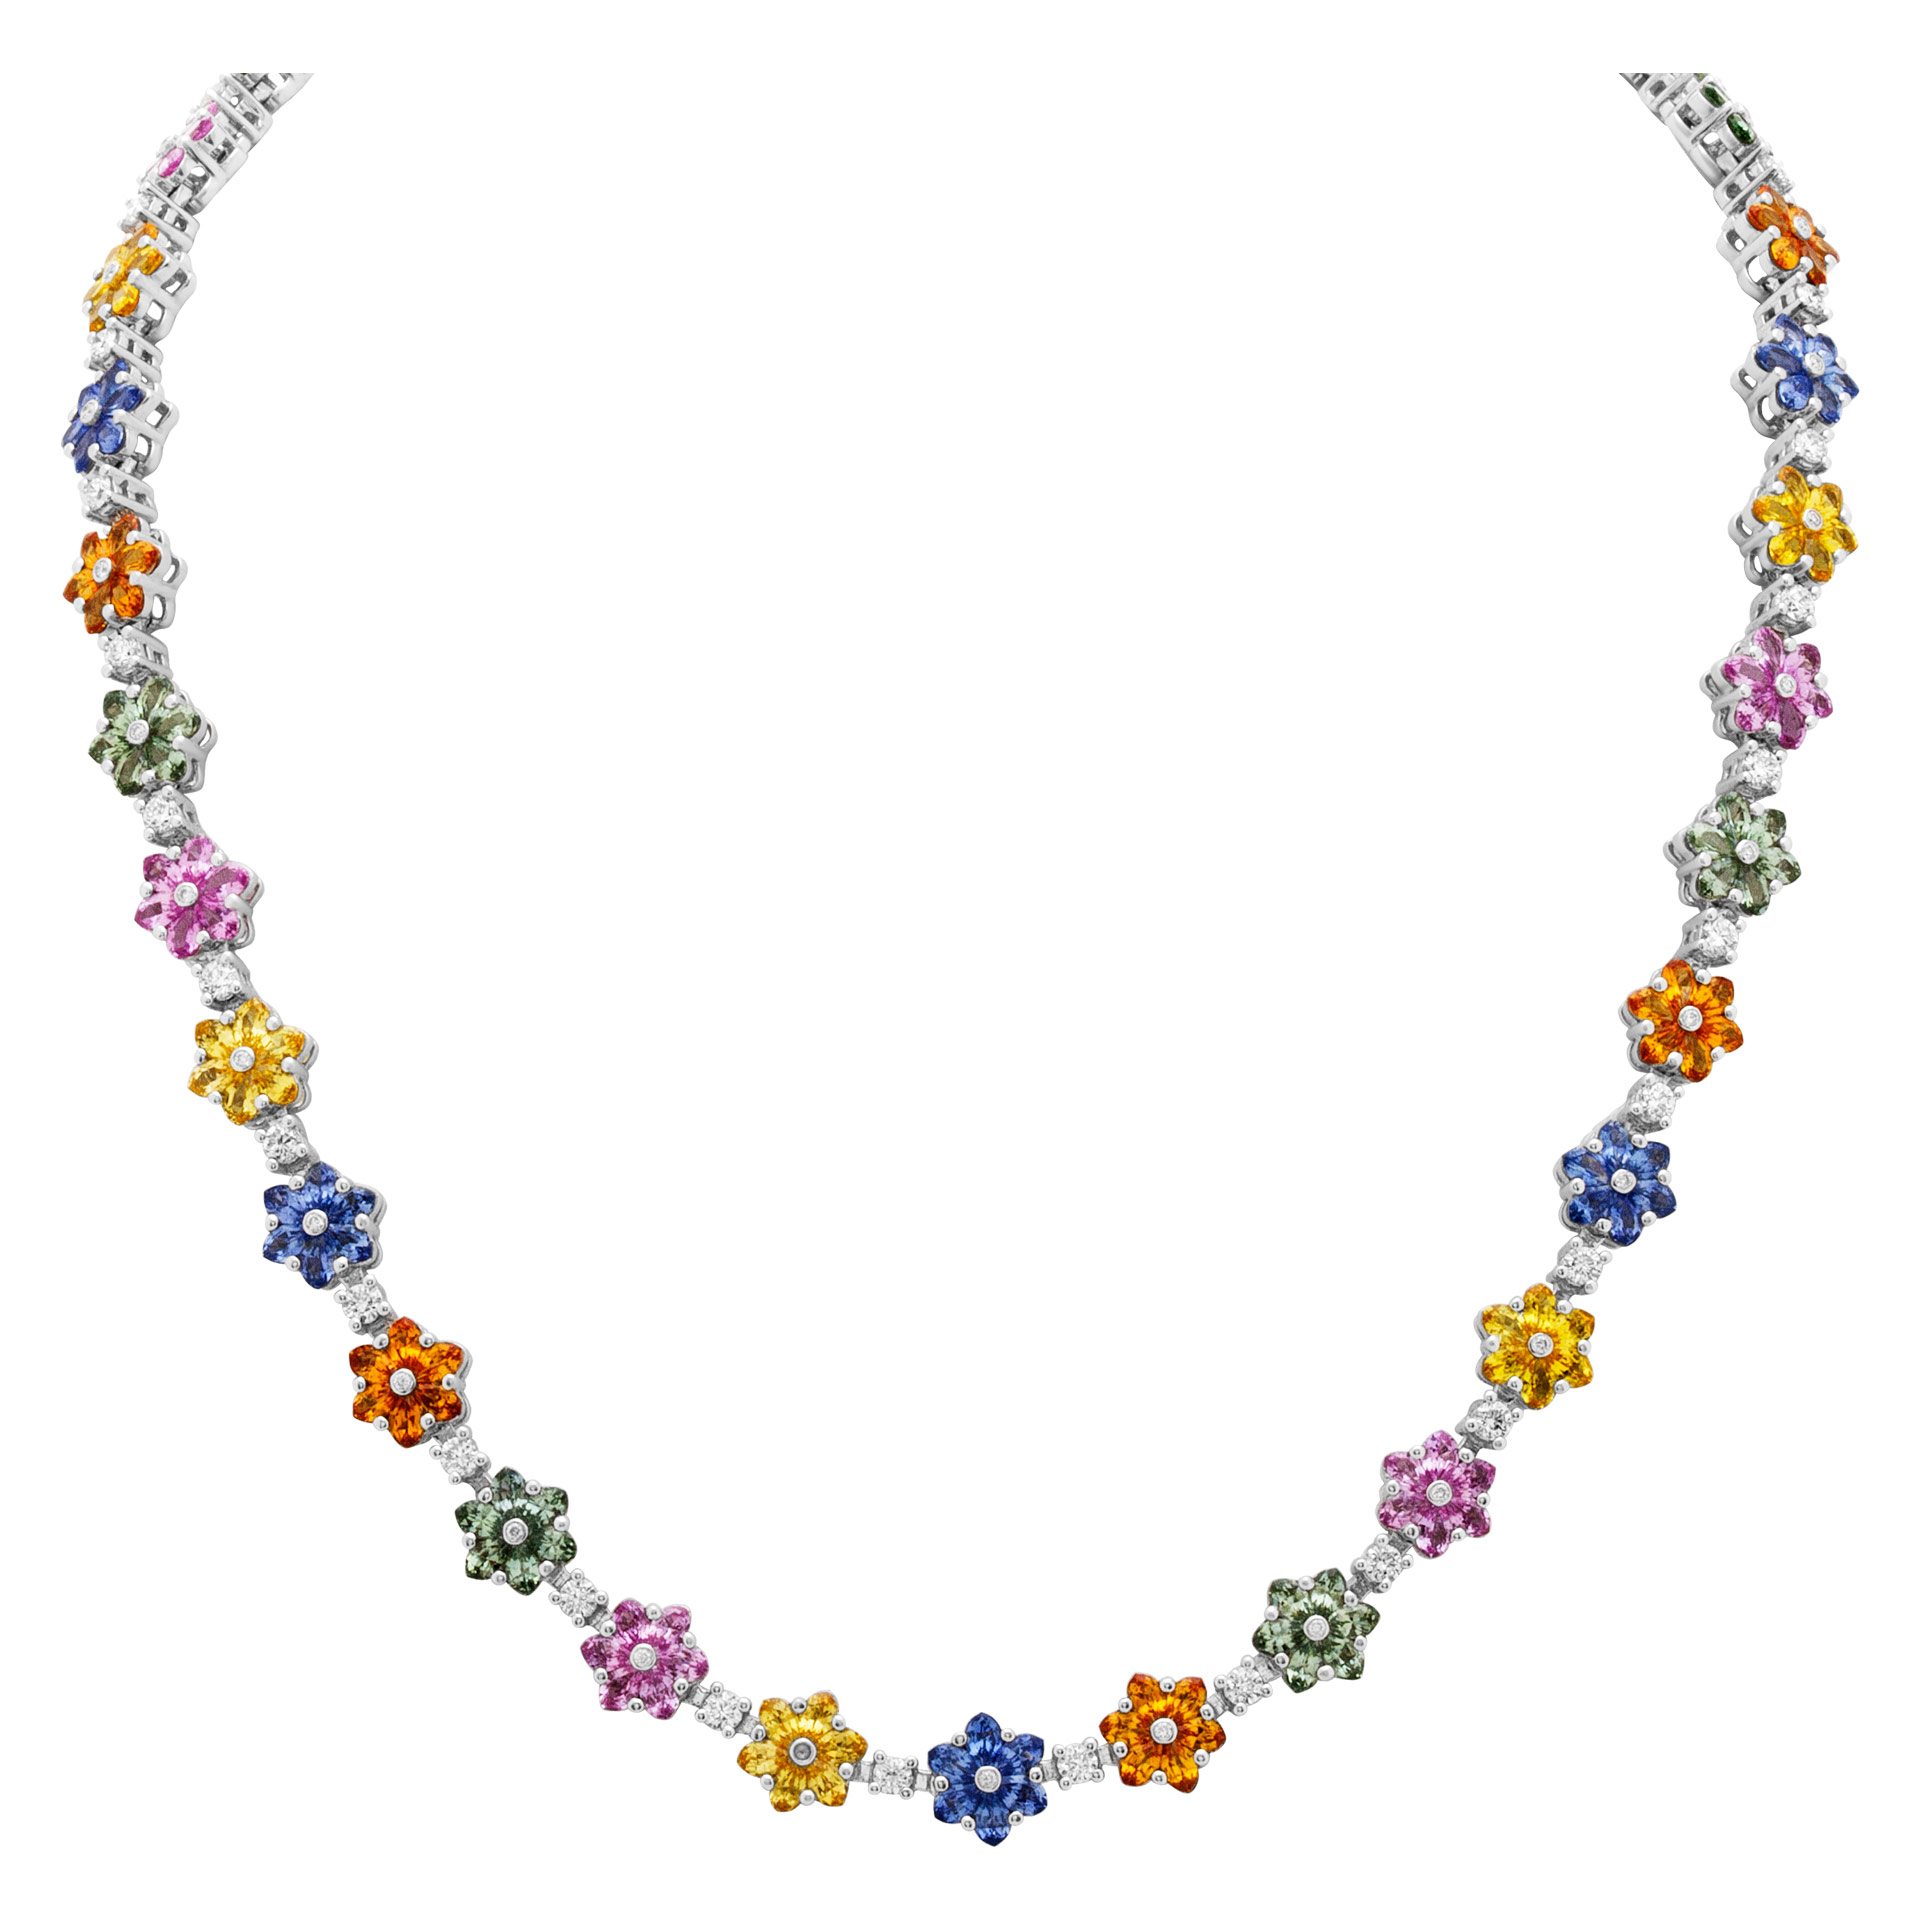 Multi-color Sapphire flower necklace in 18k white gold, 23.04 carats in sapphires 2.49 cts diamonds image 1